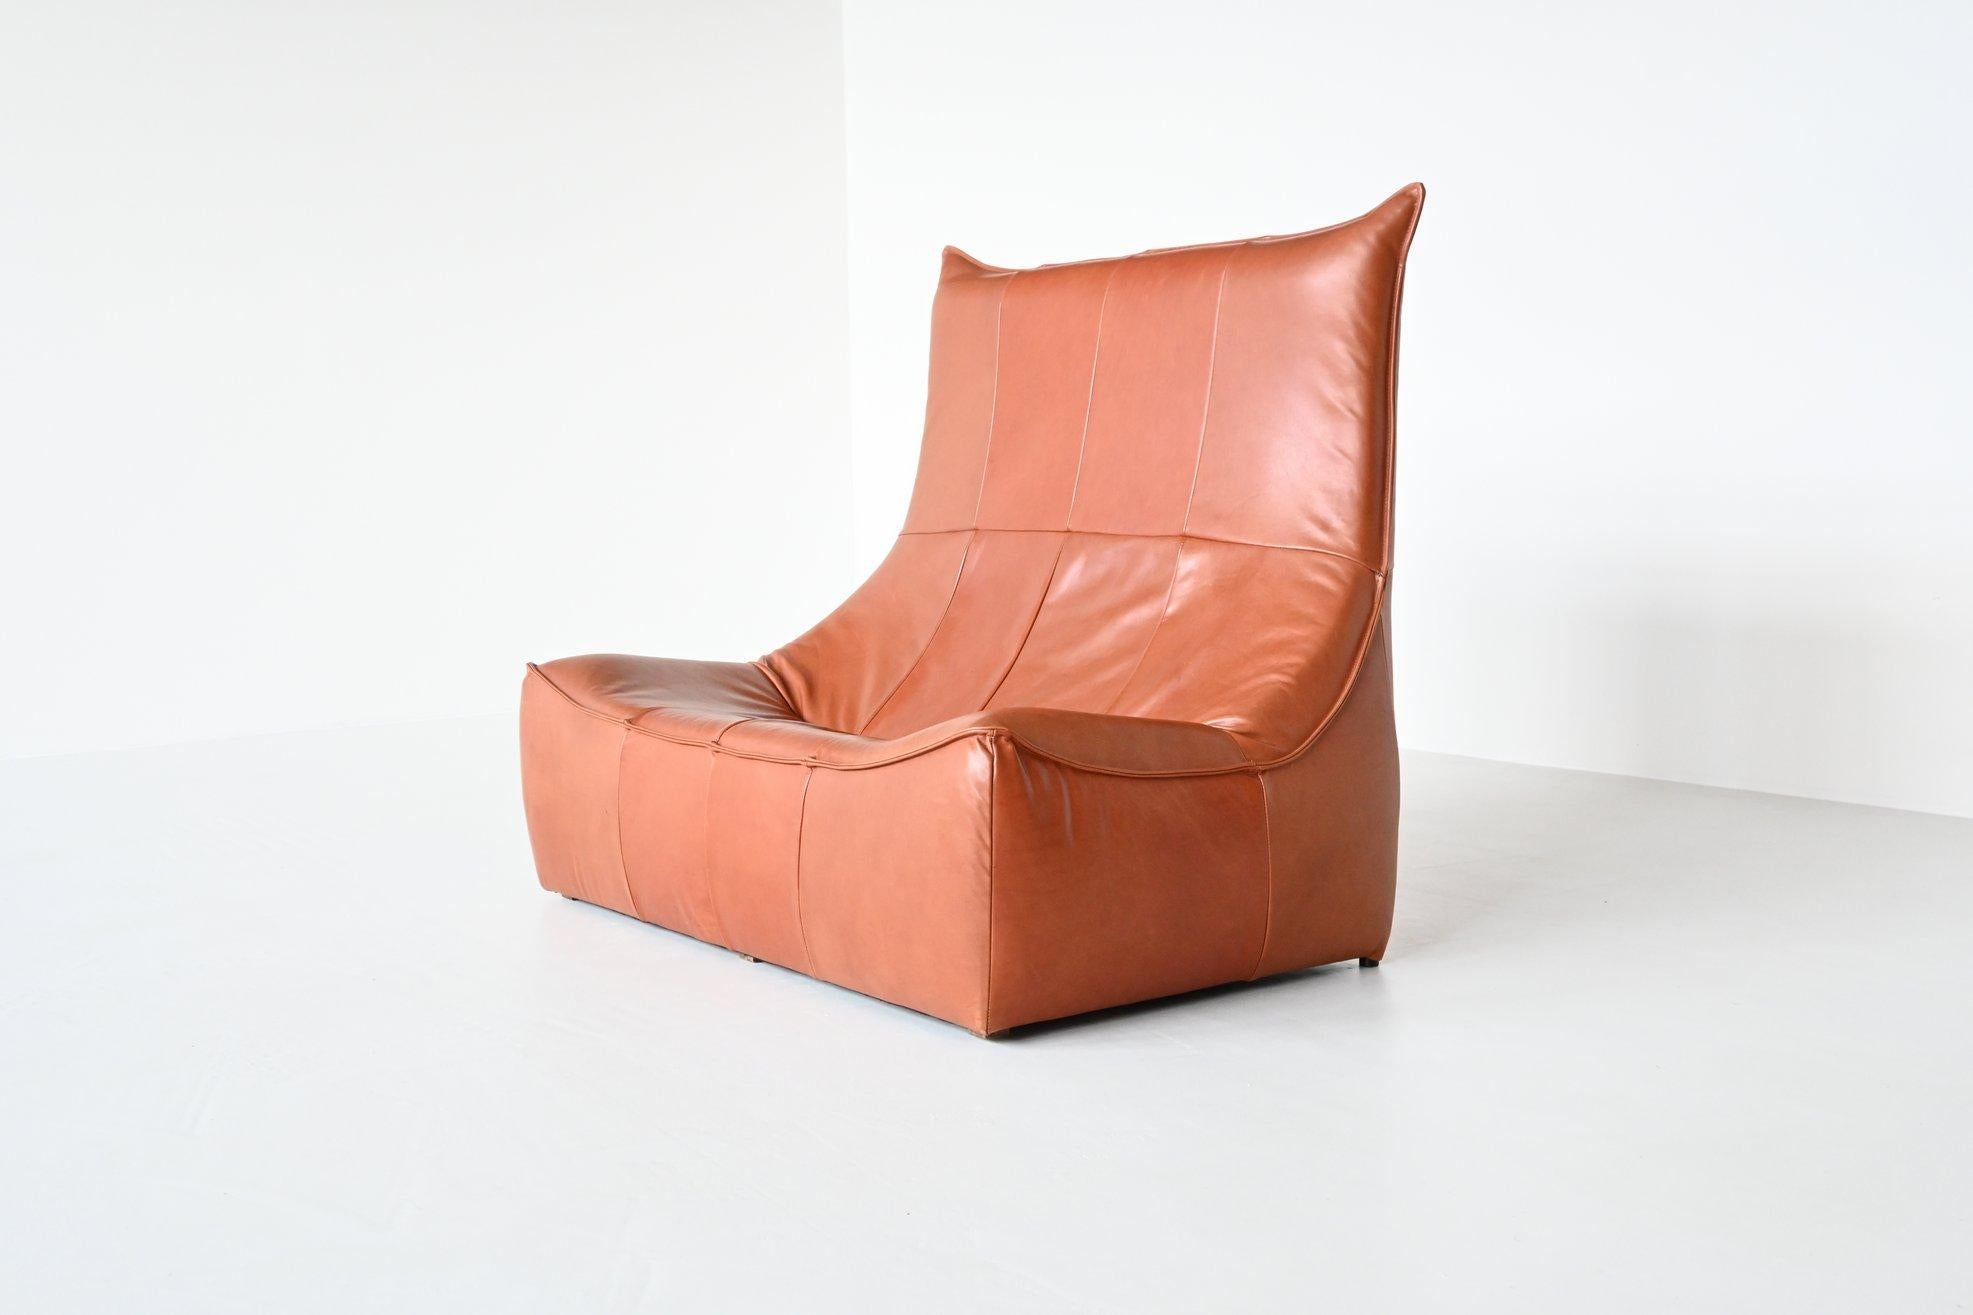 Amazing and very comfortable lounge sofa model Rock or Florence designed by Gerard van den Berg and manufactured by Montis, The Netherlands 1970. This fully leather covered two-seat sofa was one of the most successful designs from Gerard van den